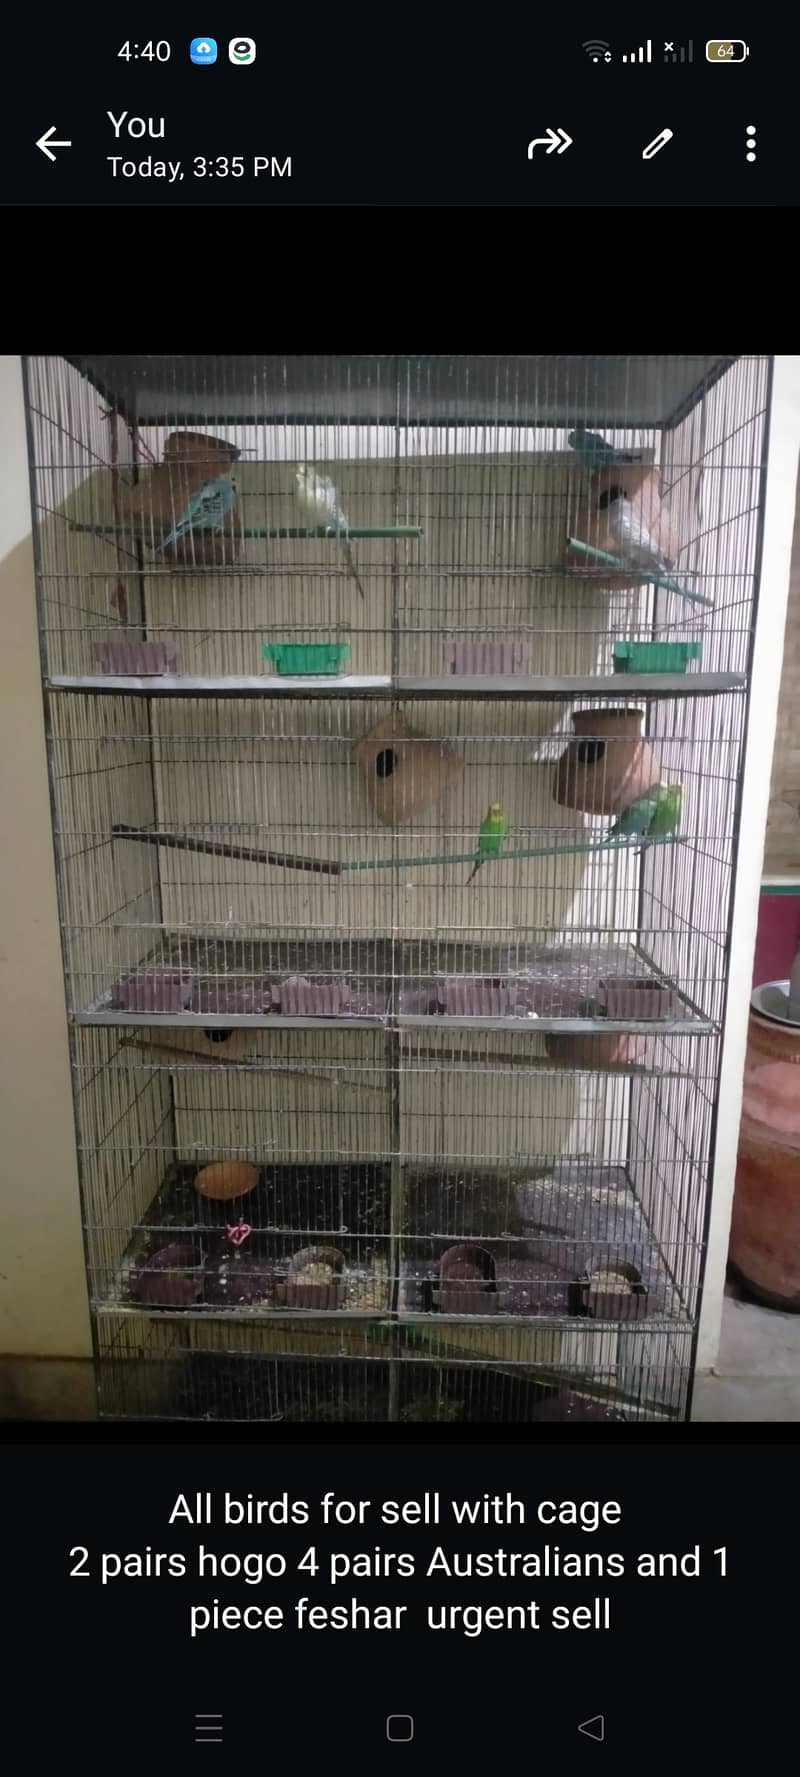 All birds for sell with cage 0